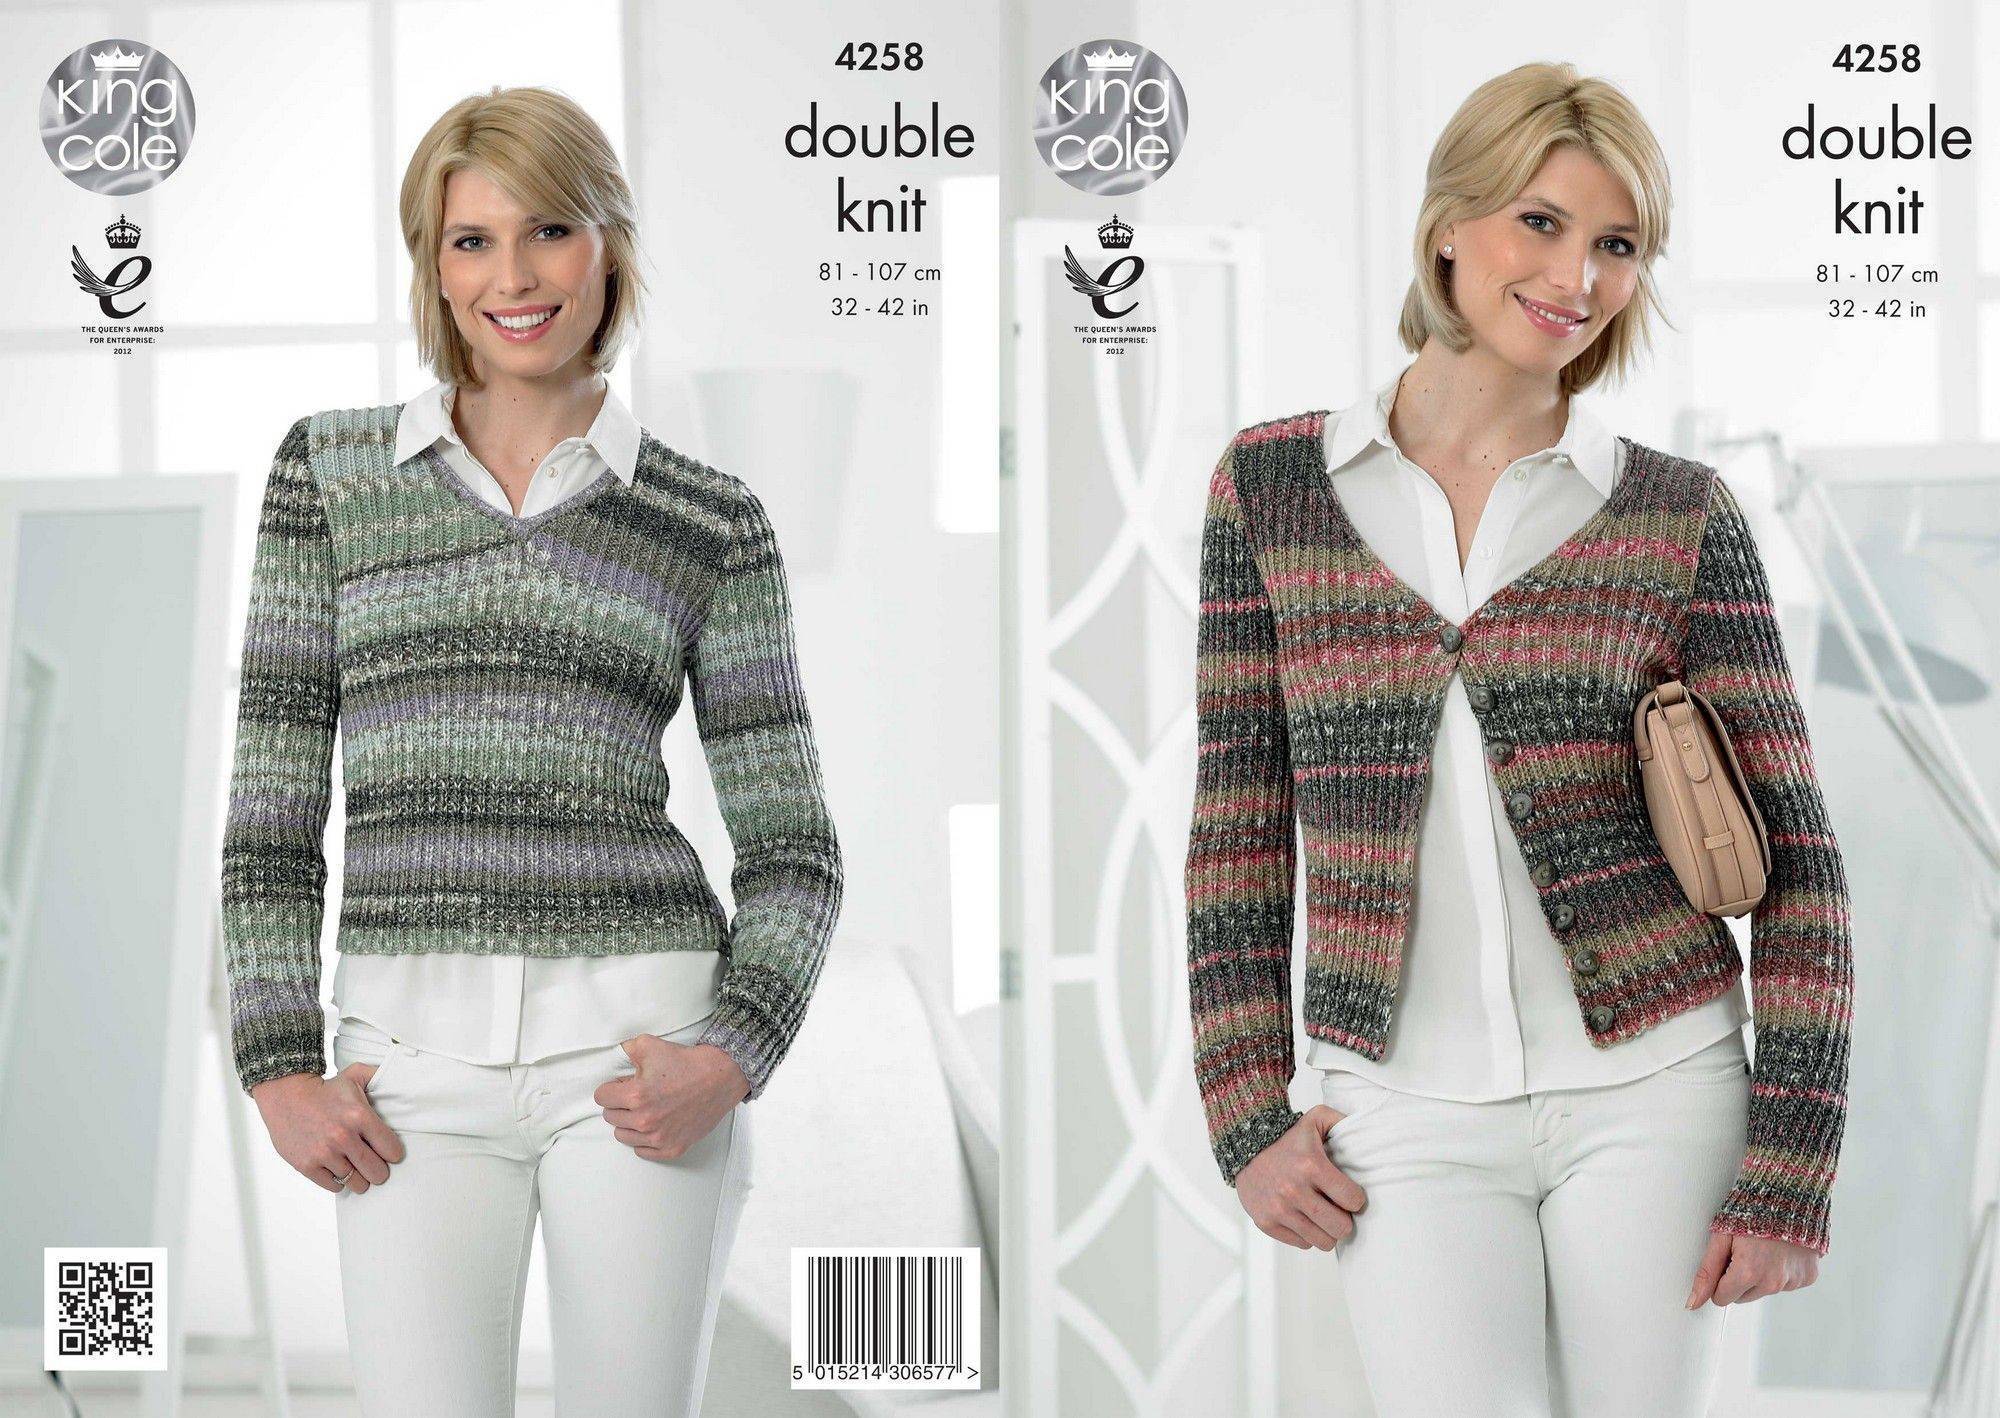 Cardigan and Top in King Cole Drifter DK (4258) | The Knitting Network